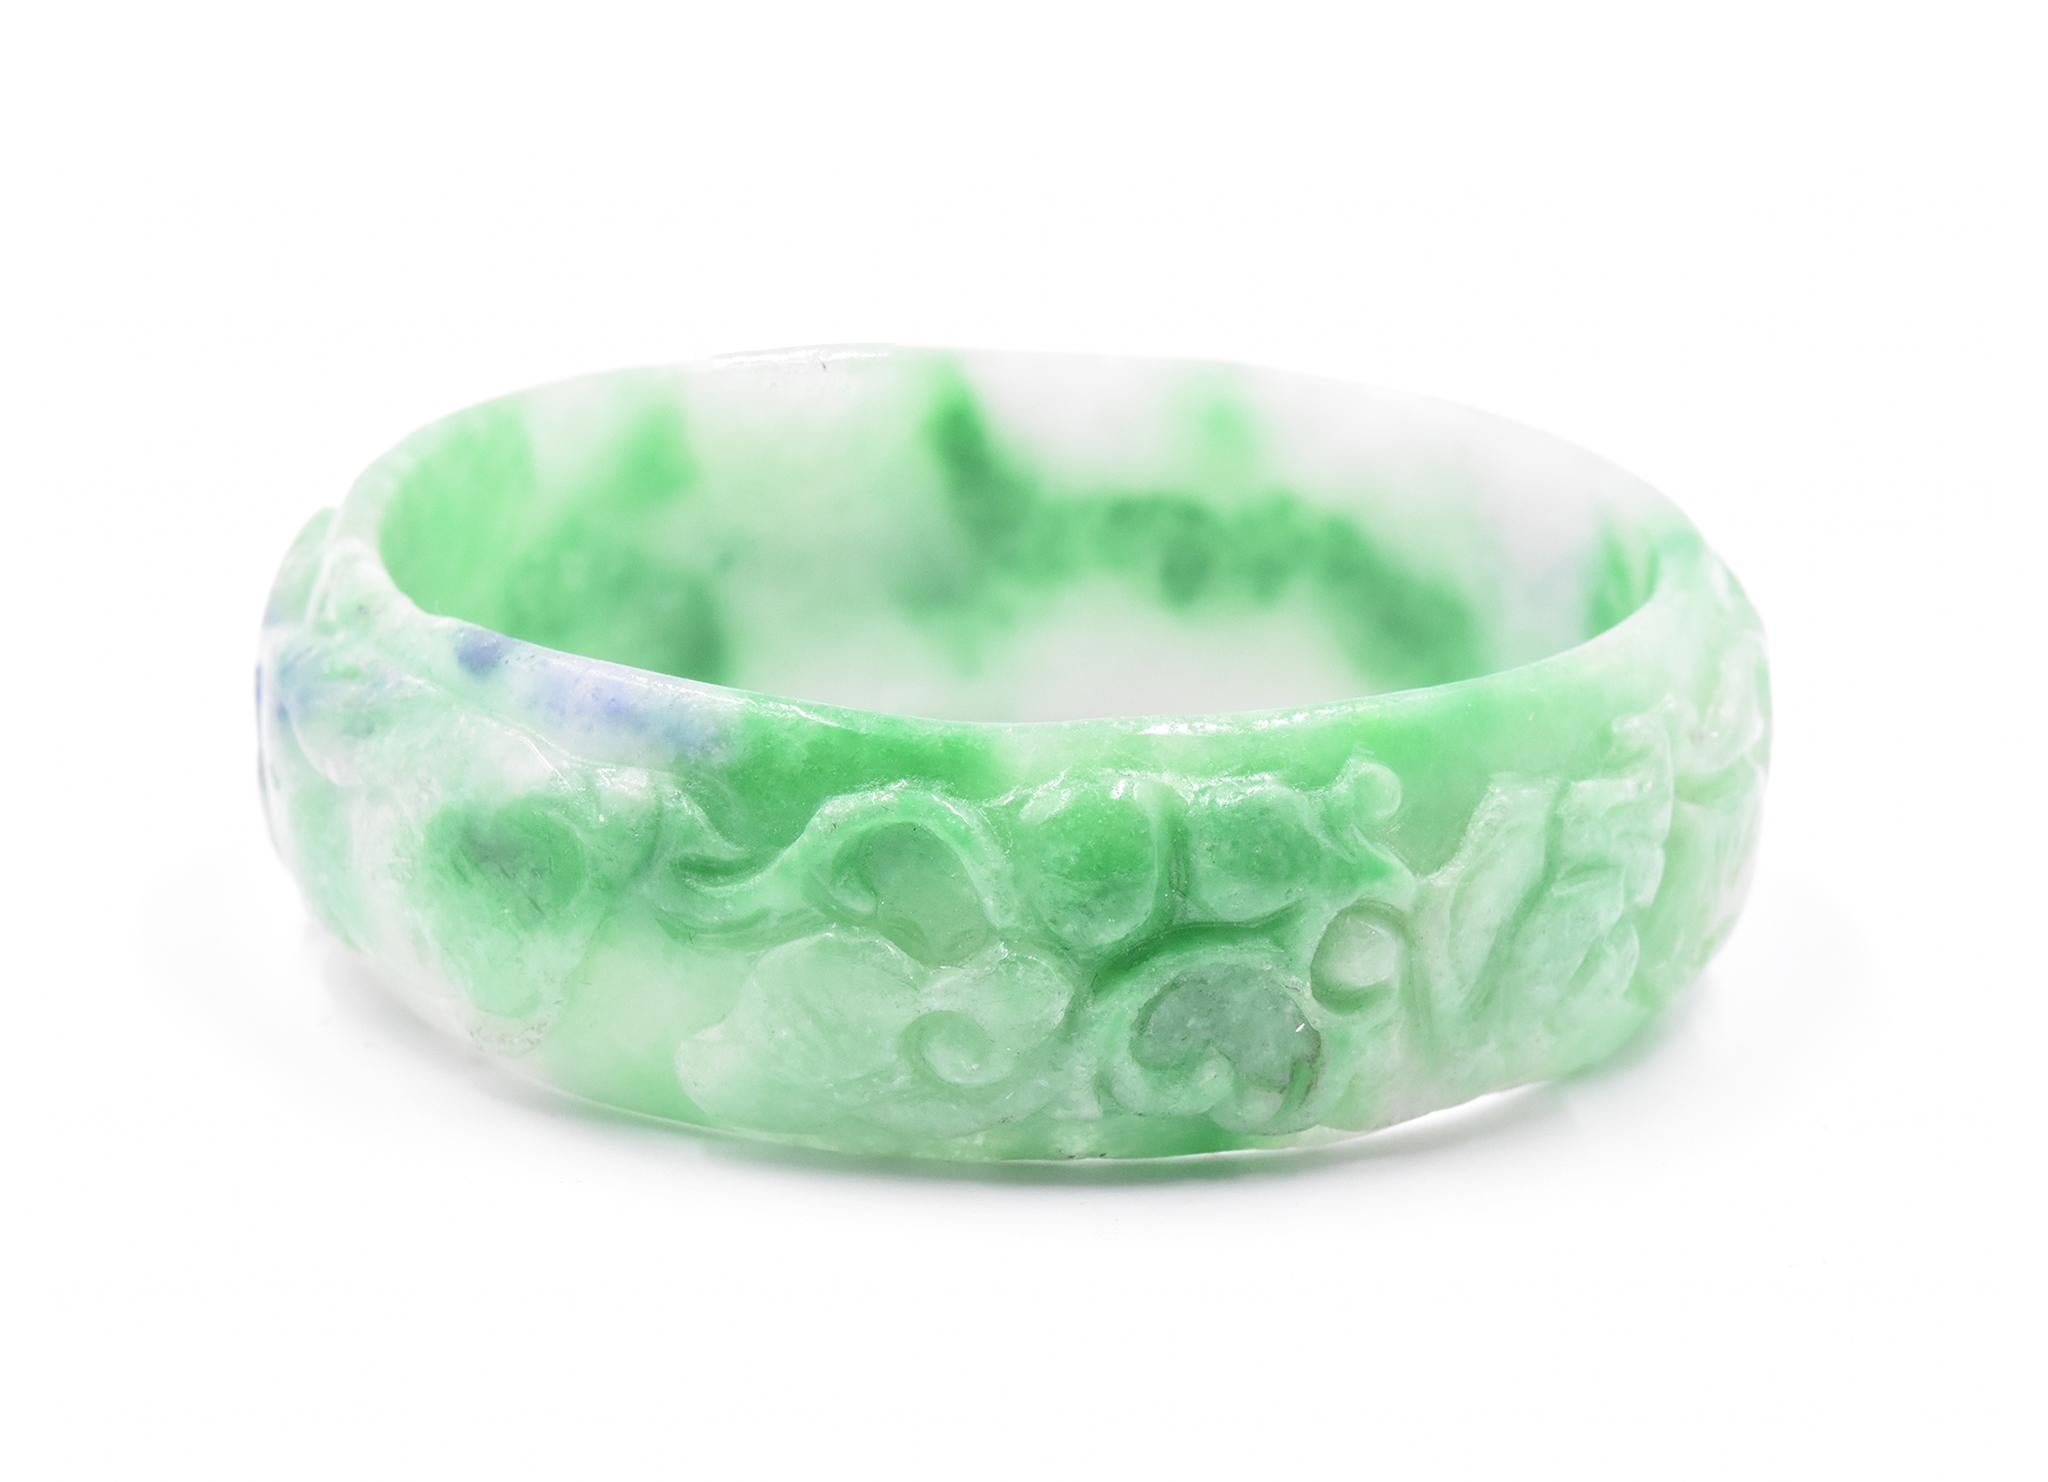 Material: Jade
Dimensions: bracelet will fit a 7.5-inch wrist
Weight: 64.64 grams
